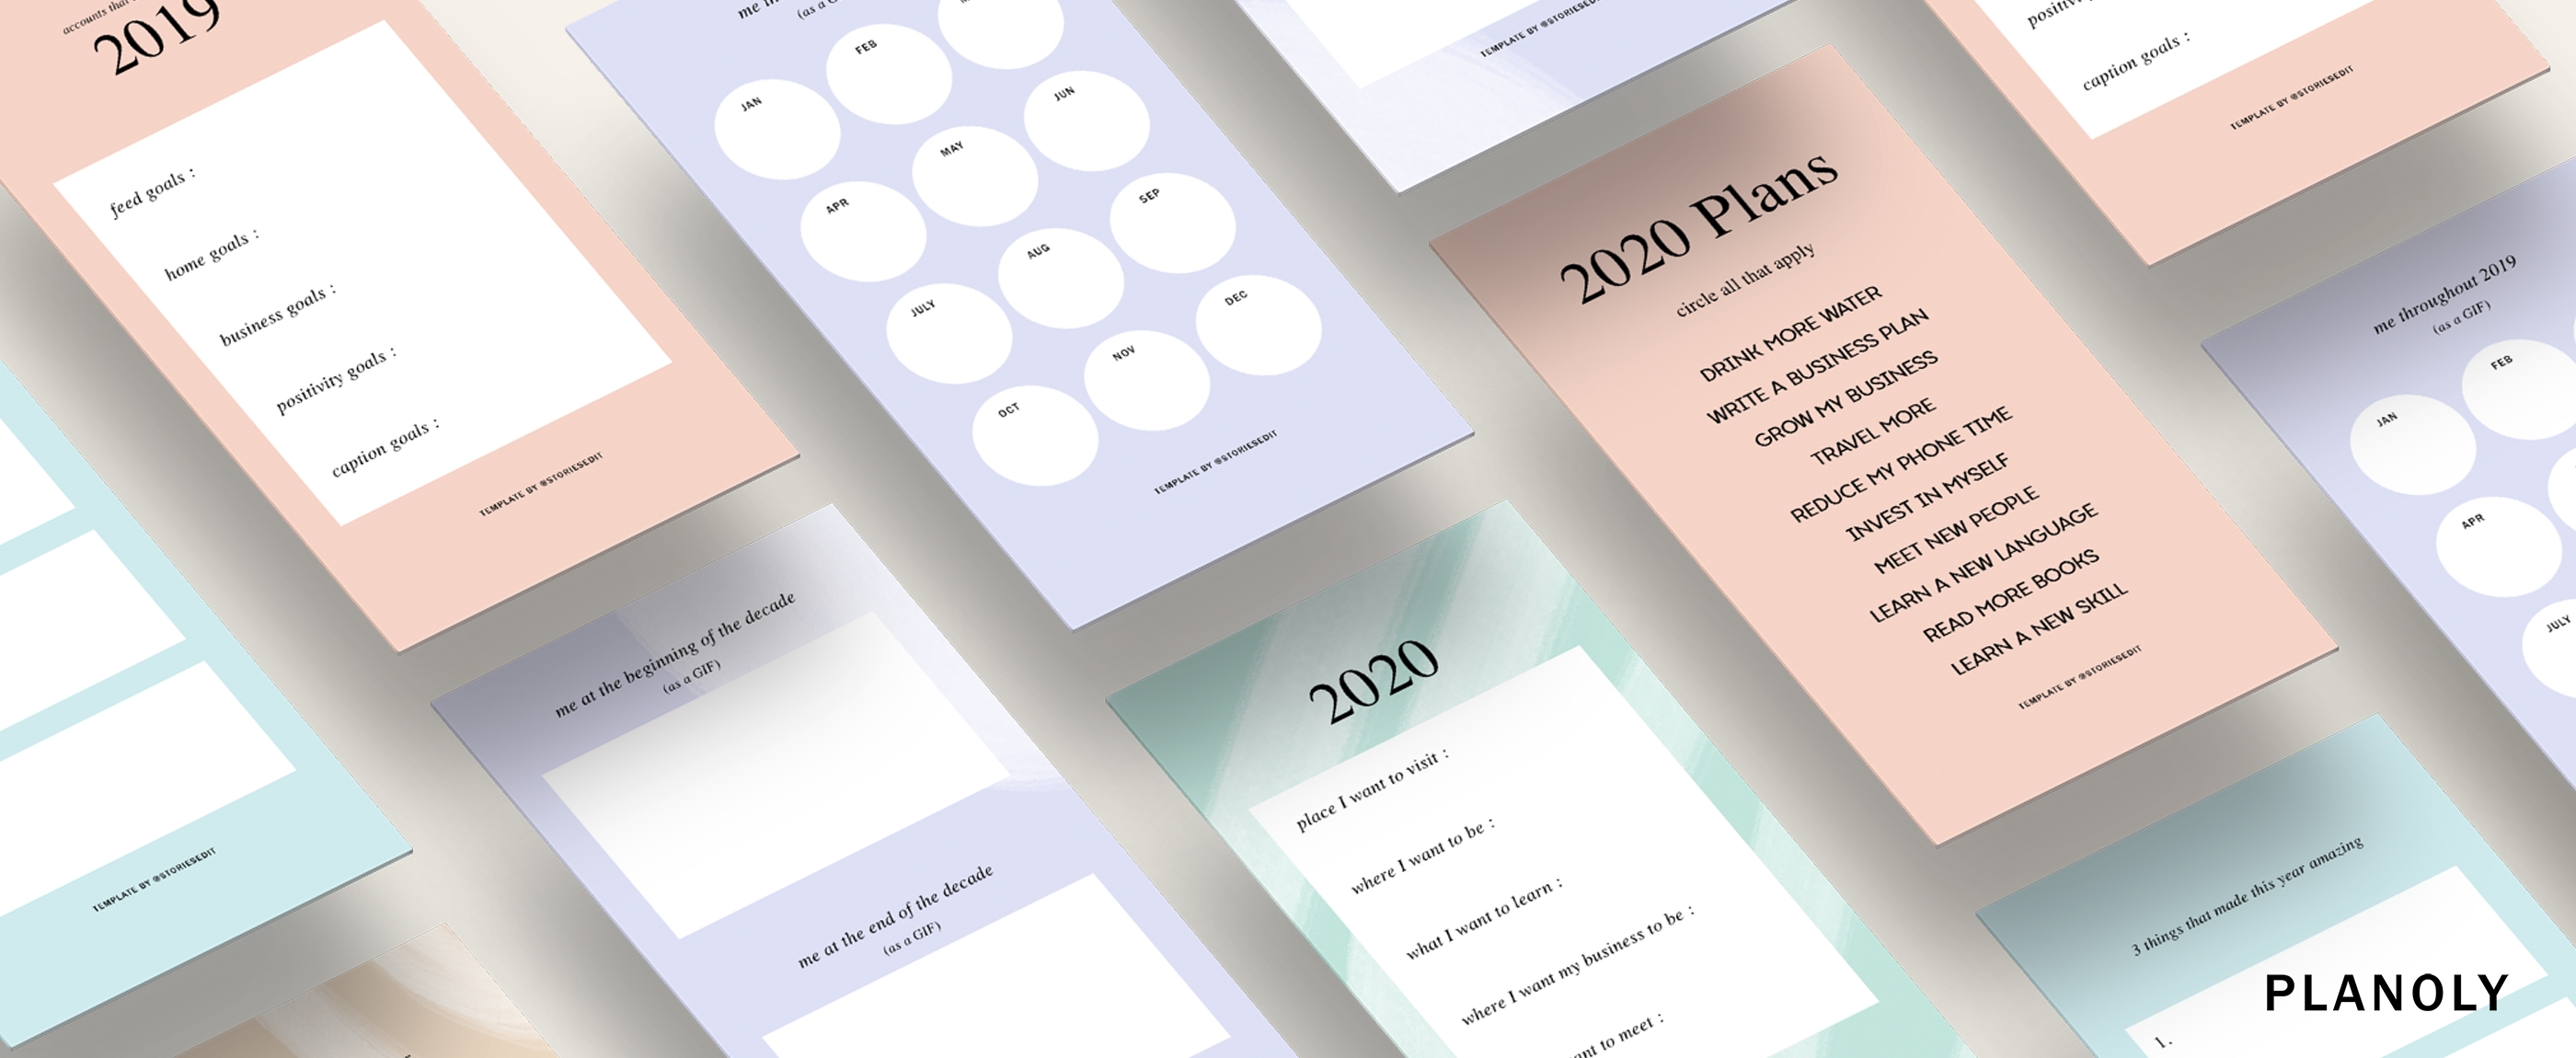 Storiesedit 2020: How To Use Our Templates Collection-Blog Post Schedule Template 2020